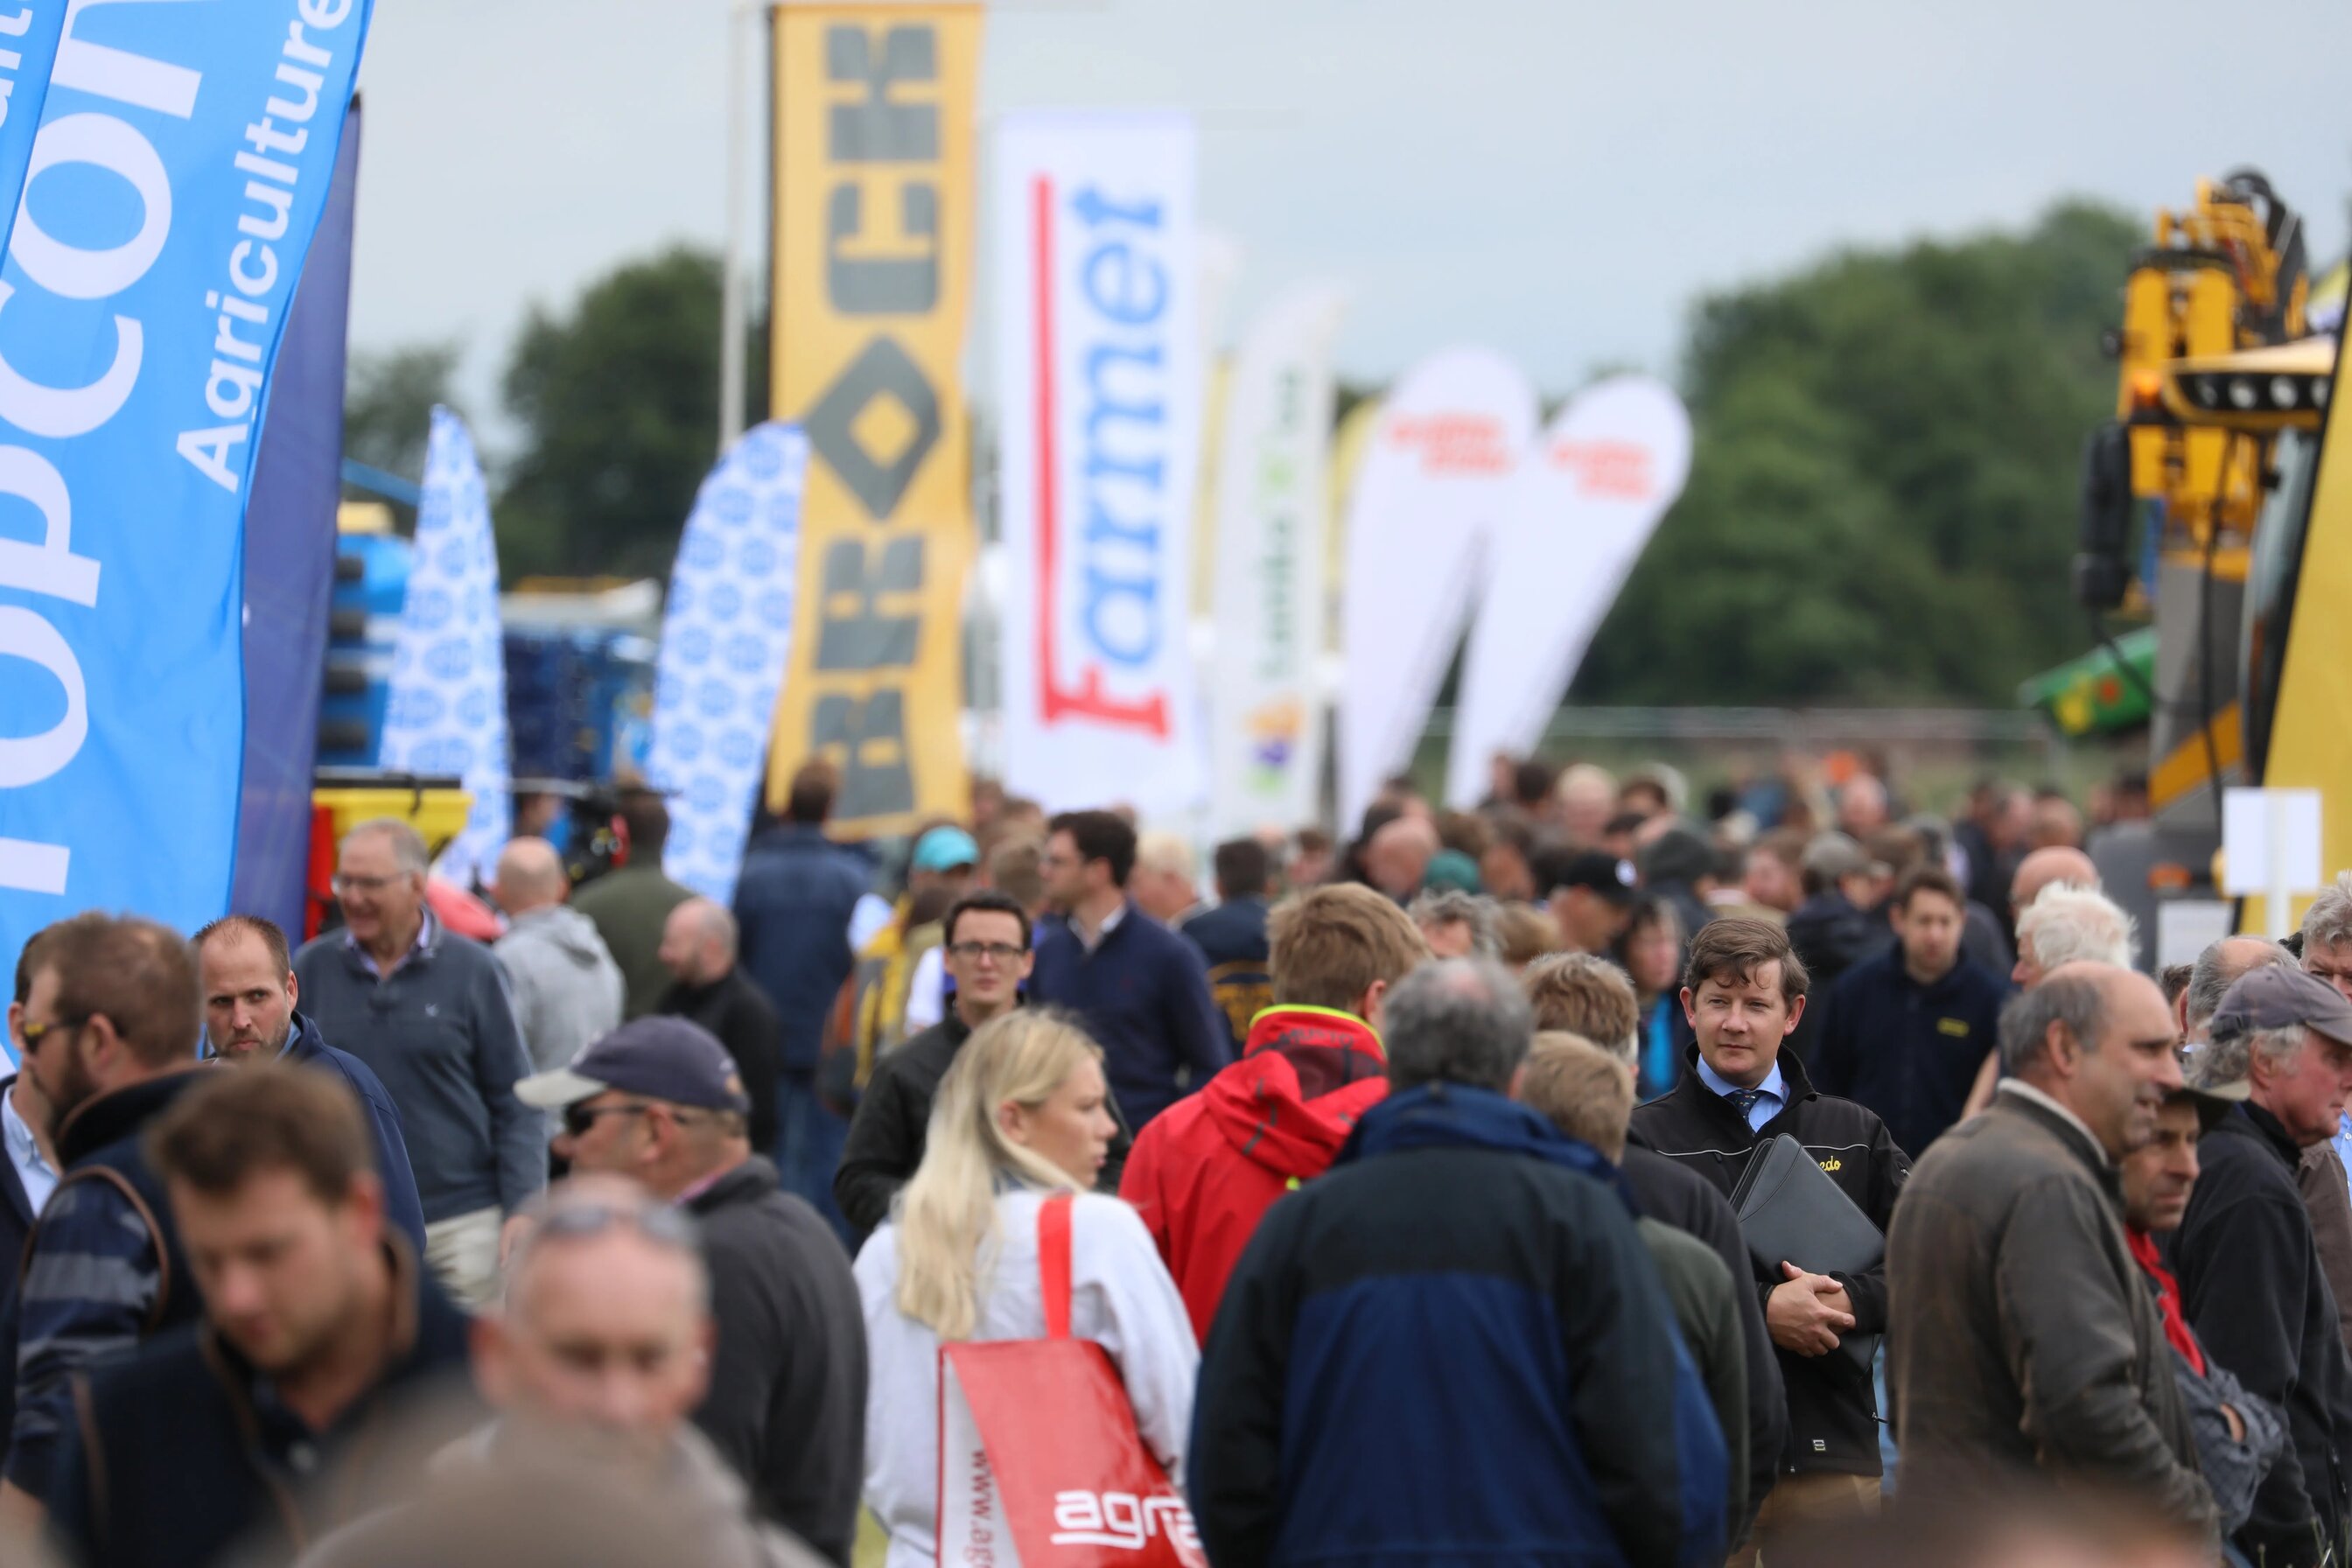 Cereals 2022 (Image courtesy of Cereals)